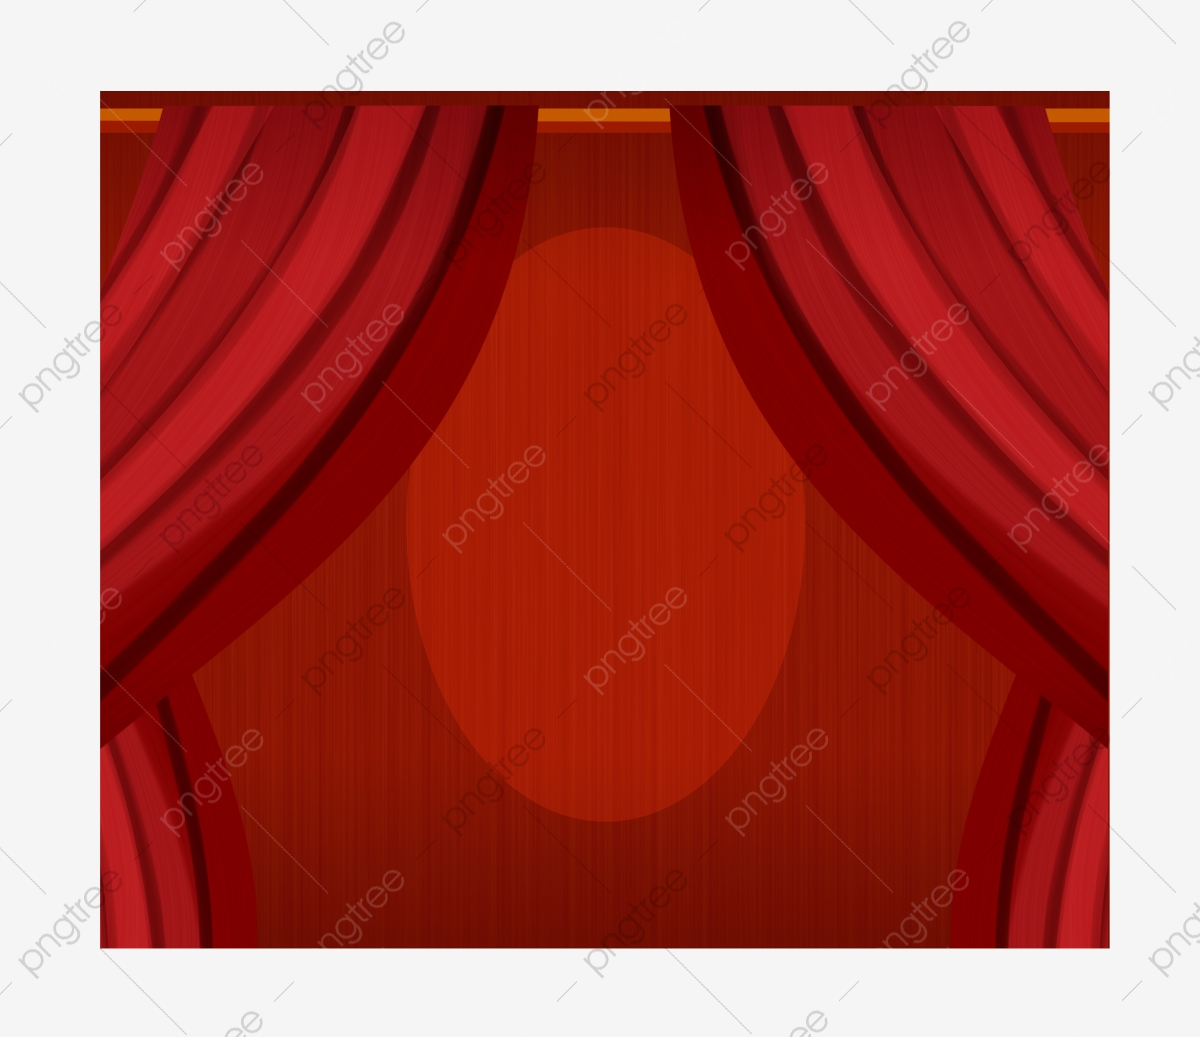 curtain clipart stage decoration